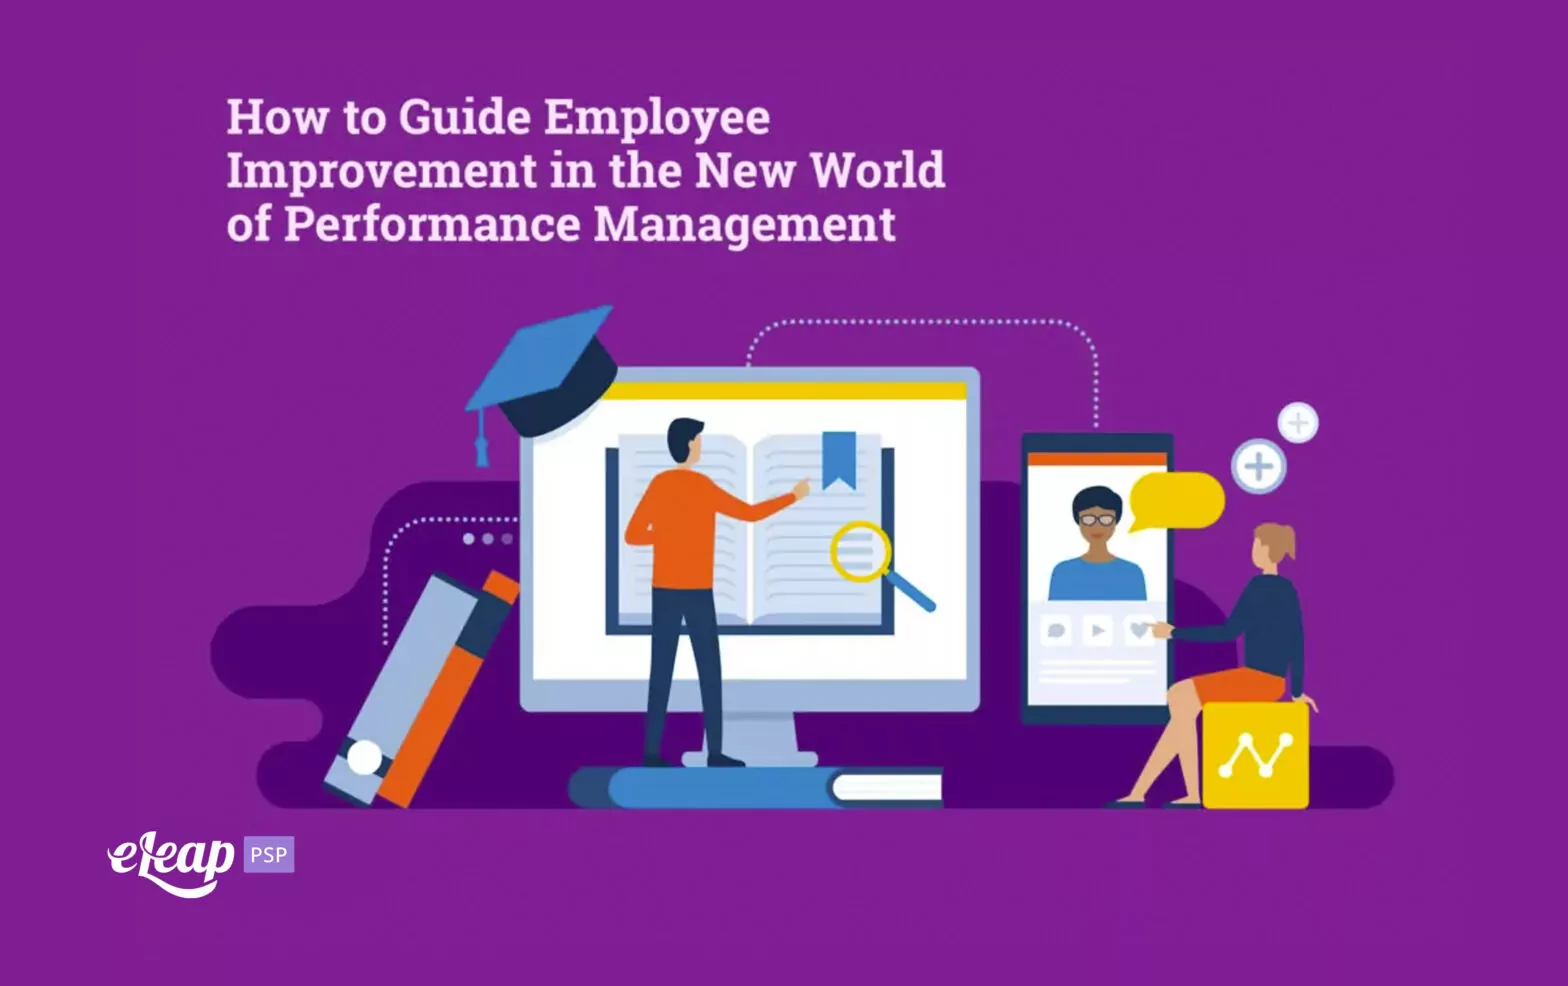 How to Guide Employee Improvement in the New World of Performance Management